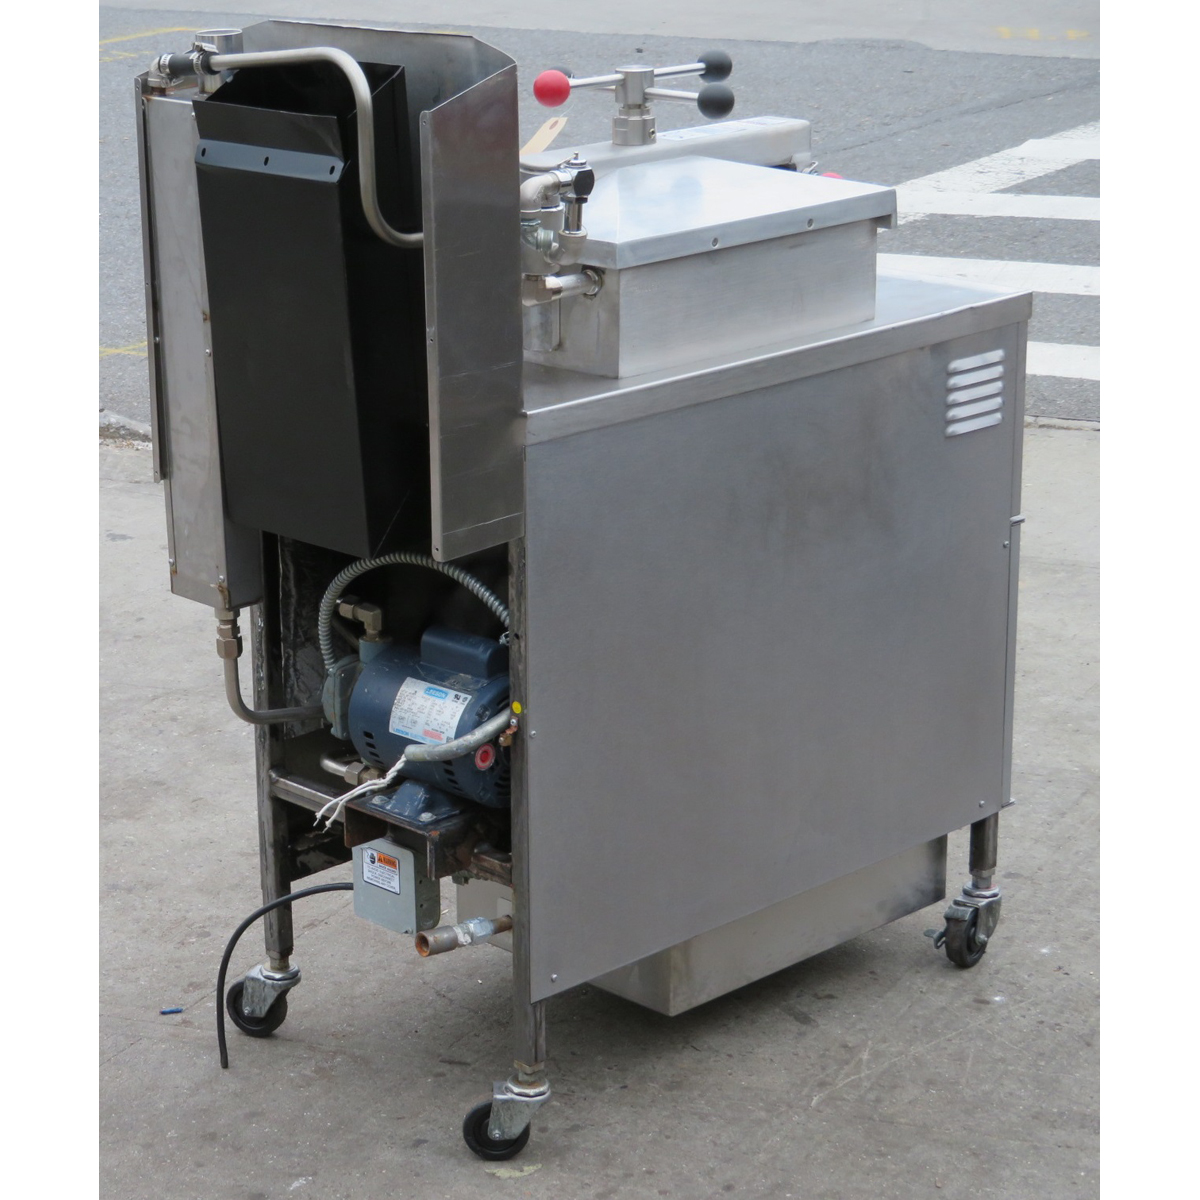 Henny Penny 600 Computron 1000 Natural Gas Pressure Fryer 120V Pressure Fryer, Used Great Condition image 3